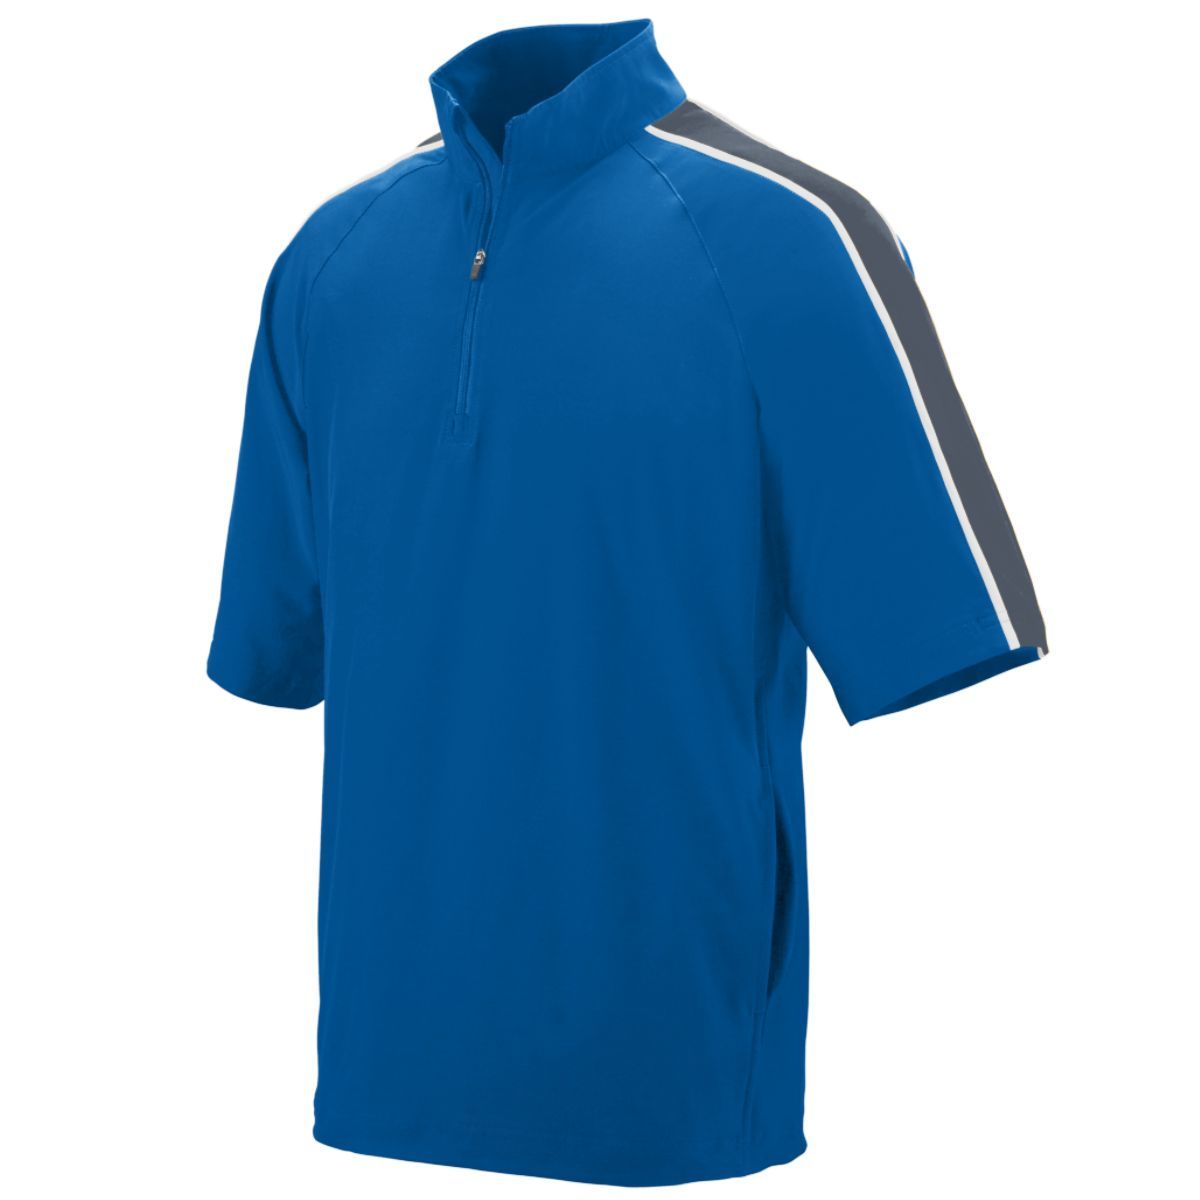 Augusta Sportswear Quantum Short Sleeve Pullover in Royal/Graphite/White  -Part of the Adult, Adult-Jacket, Augusta-Products, Outerwear product lines at KanaleyCreations.com